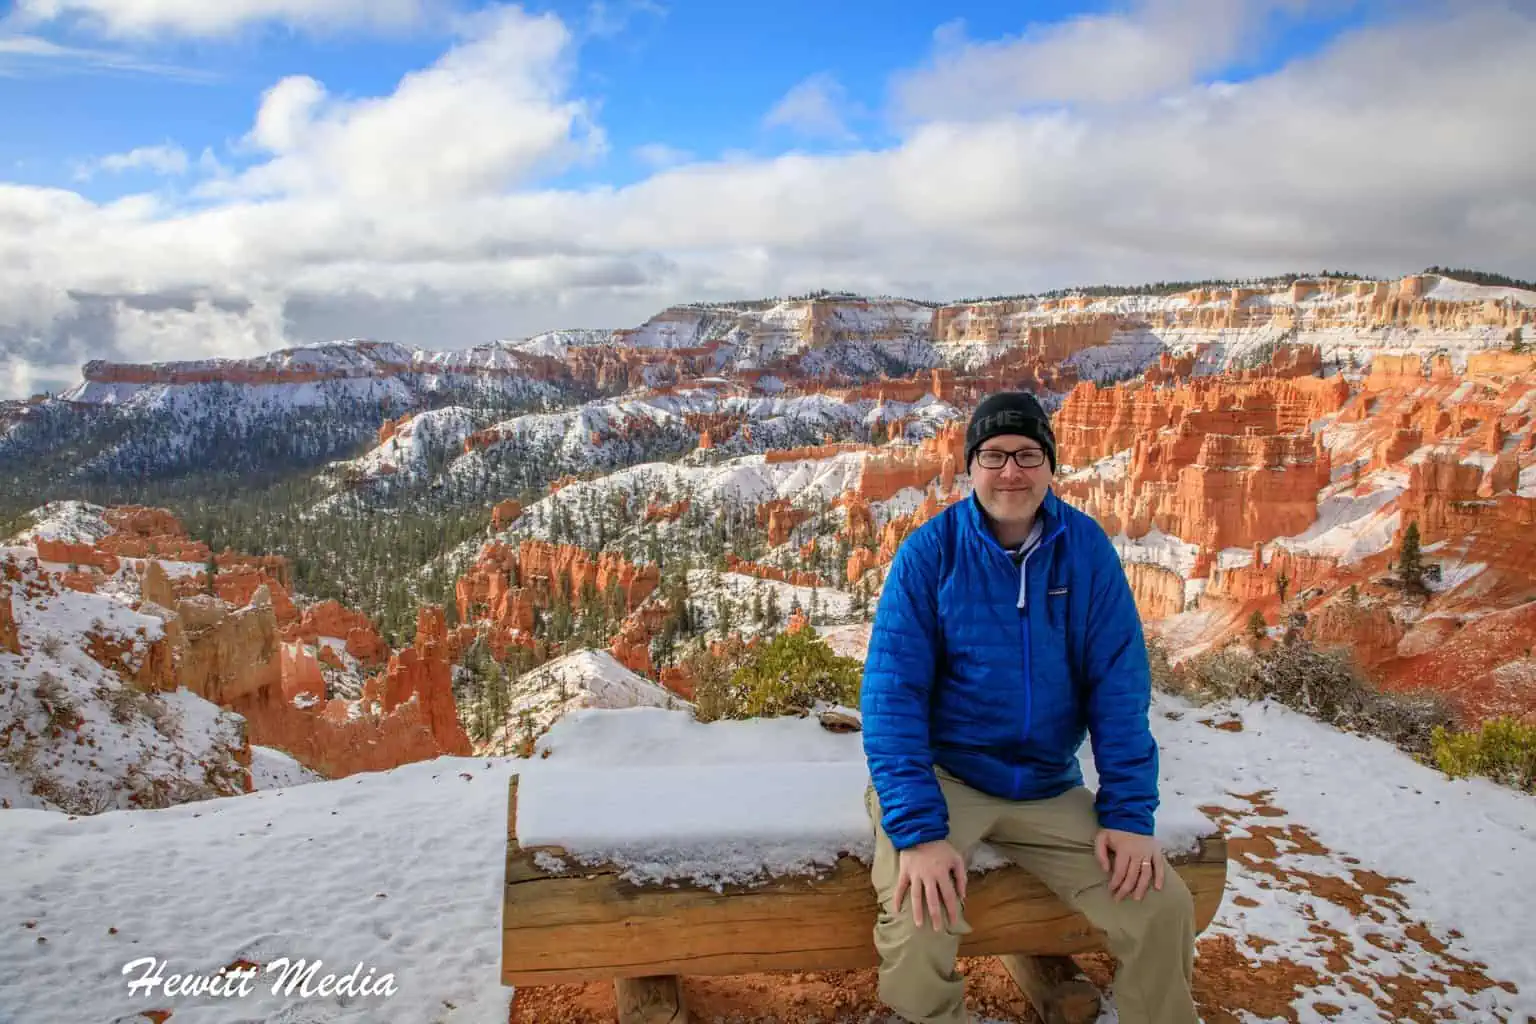 Most Visited National Parks - Bryce Canyon National Park